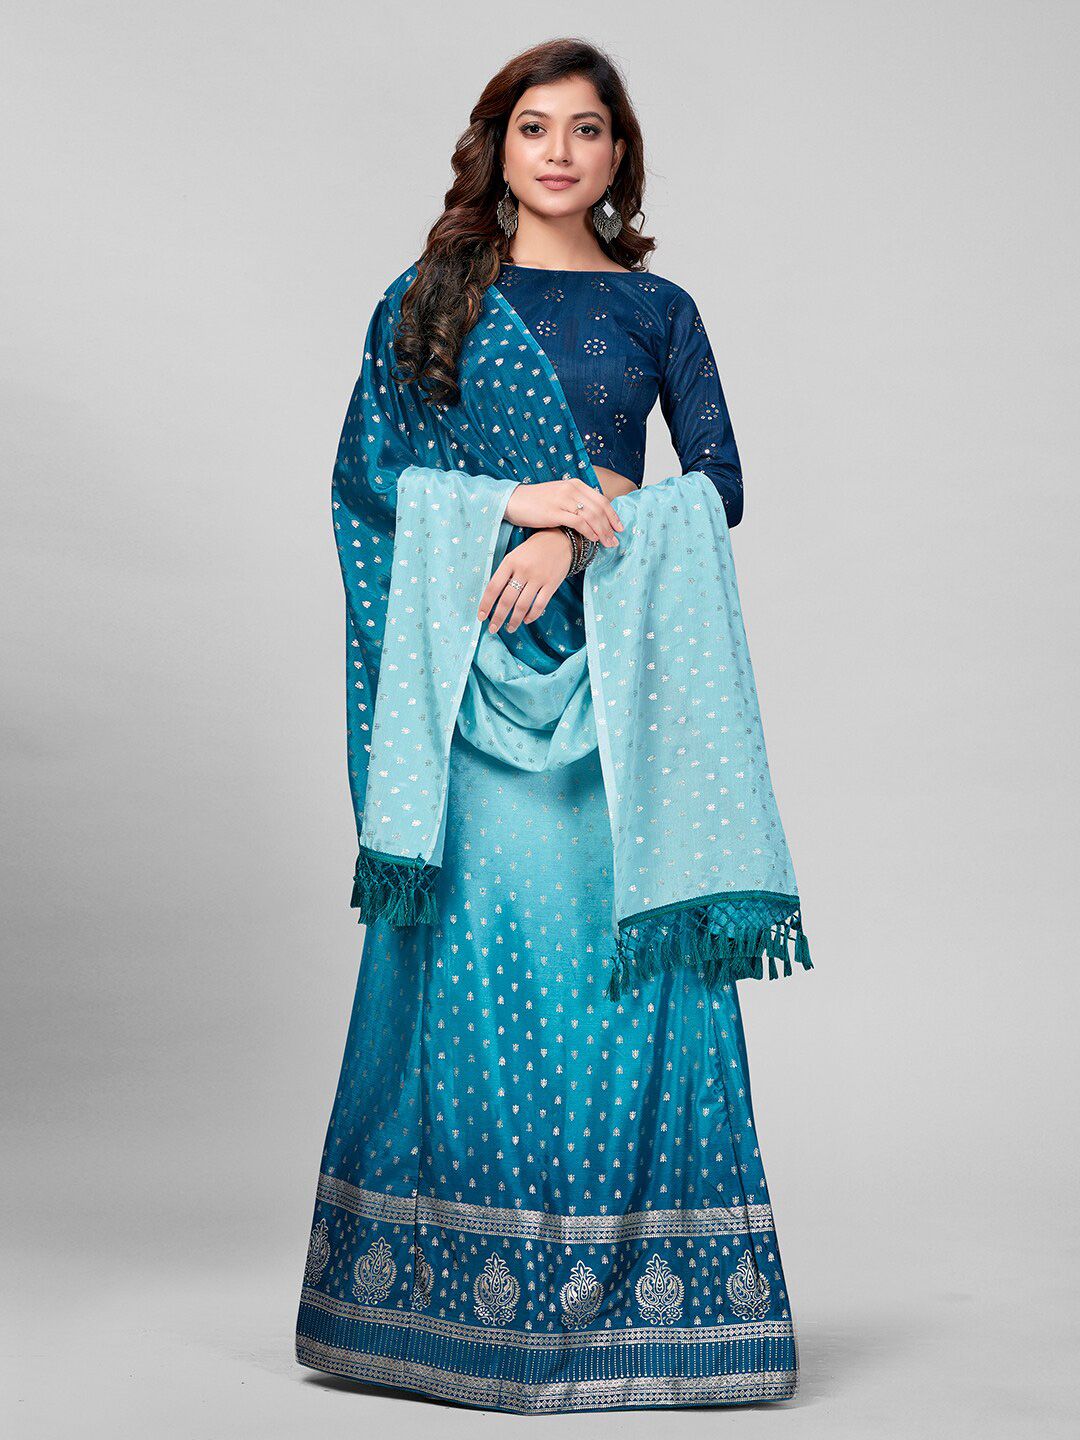 Mitera Turquoise Blue Embroidered Semi-Stitched Lehenga & Unstitched Blouse With Dupatta Price in India